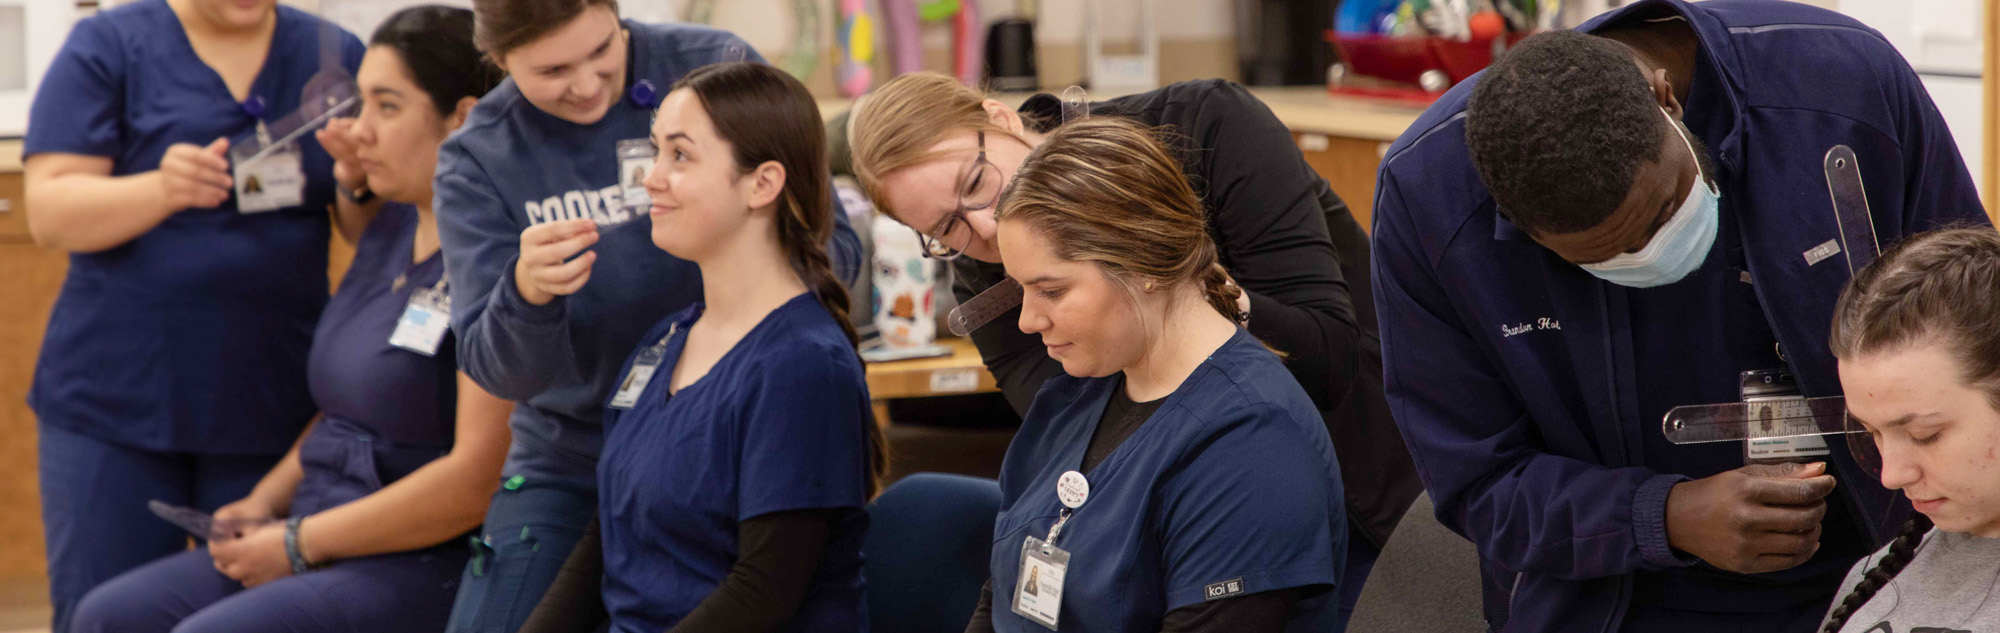 Occupational therapy assistant students learn new skills.